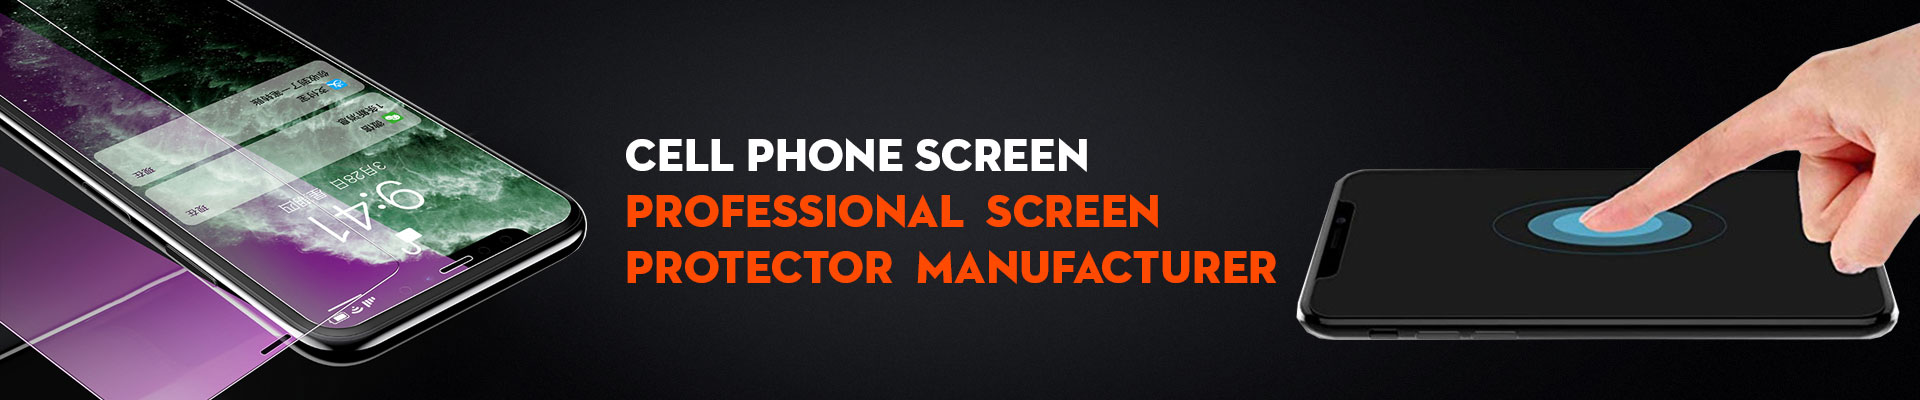 CELL PHONE SCREEN PROTECTOR MANUFACTURER